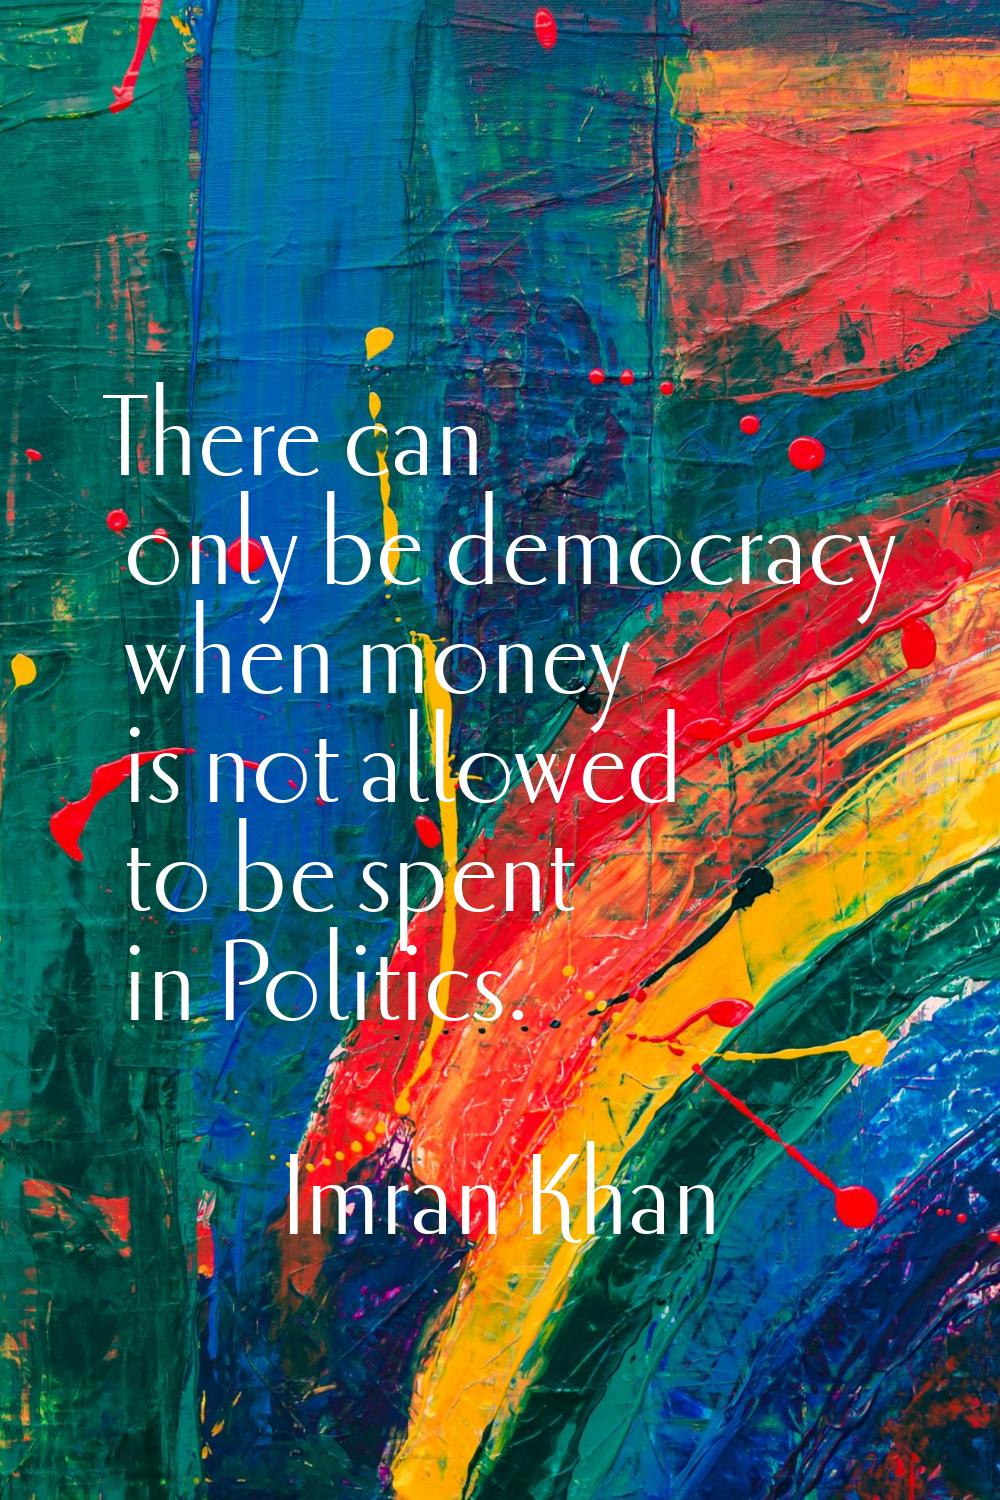 There can only be democracy when money is not allowed to be spent in Politics.